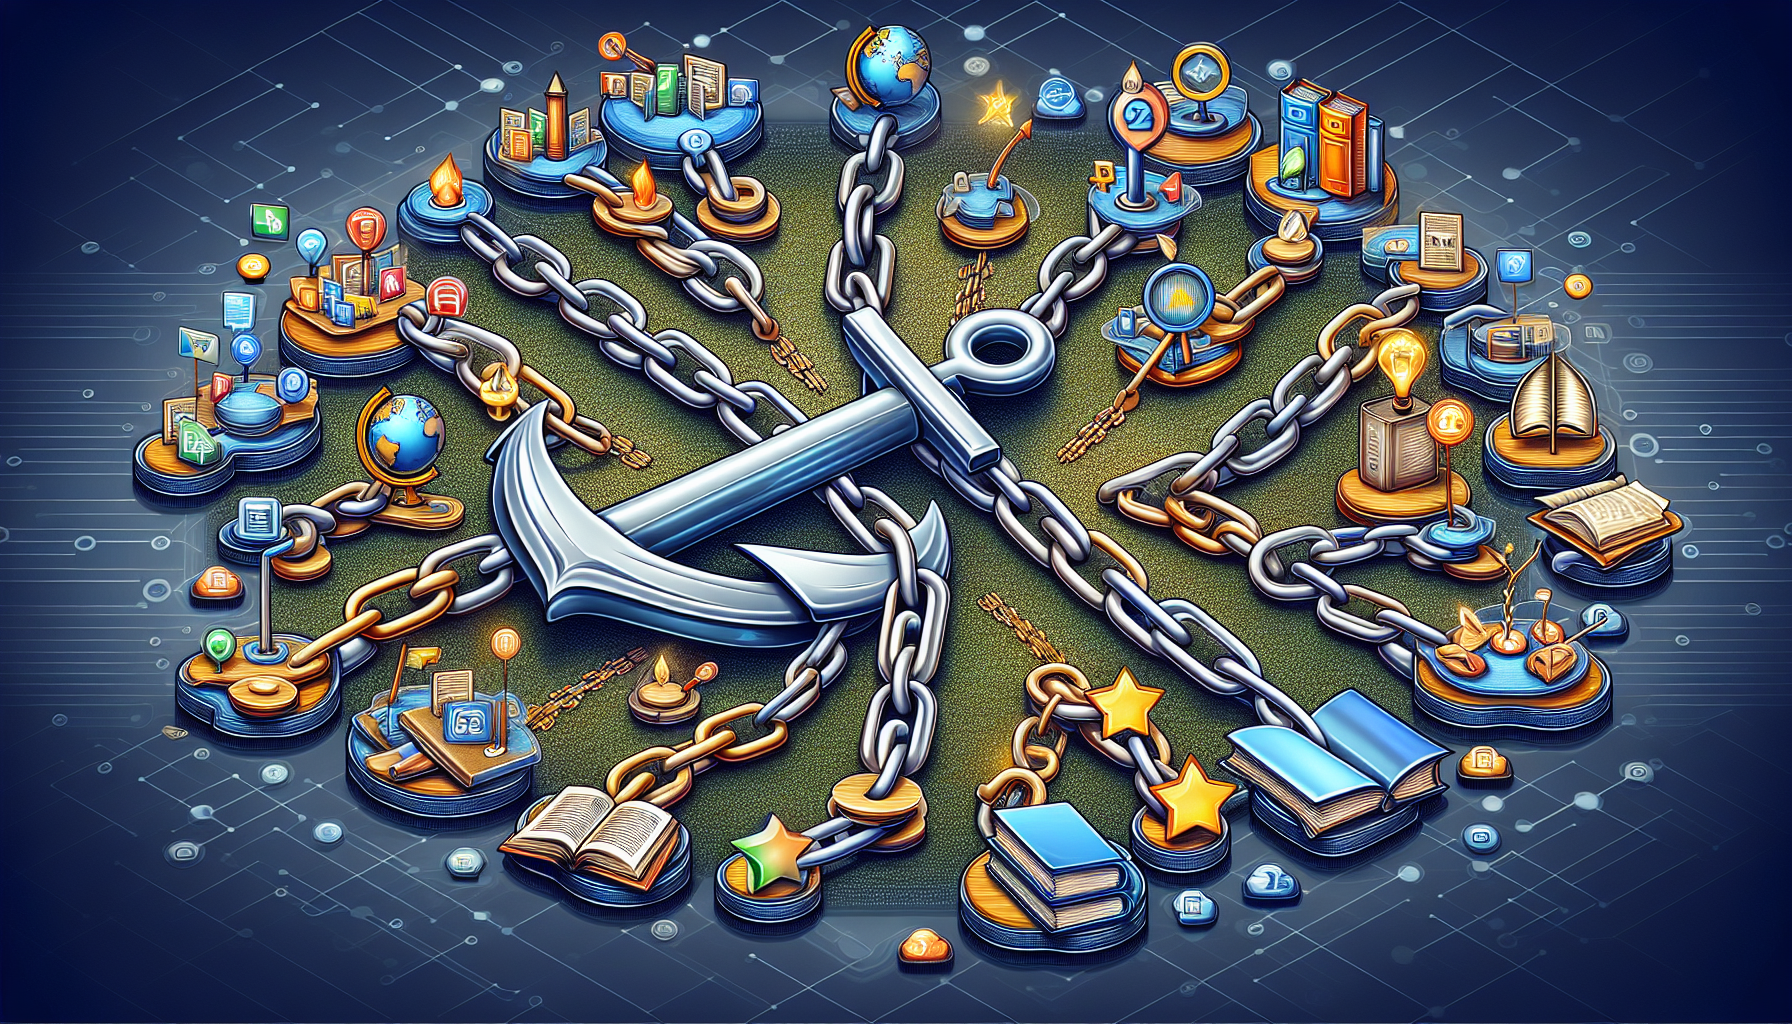 Diverse set of backlink types and anchor texts representing building a strong backlink profile